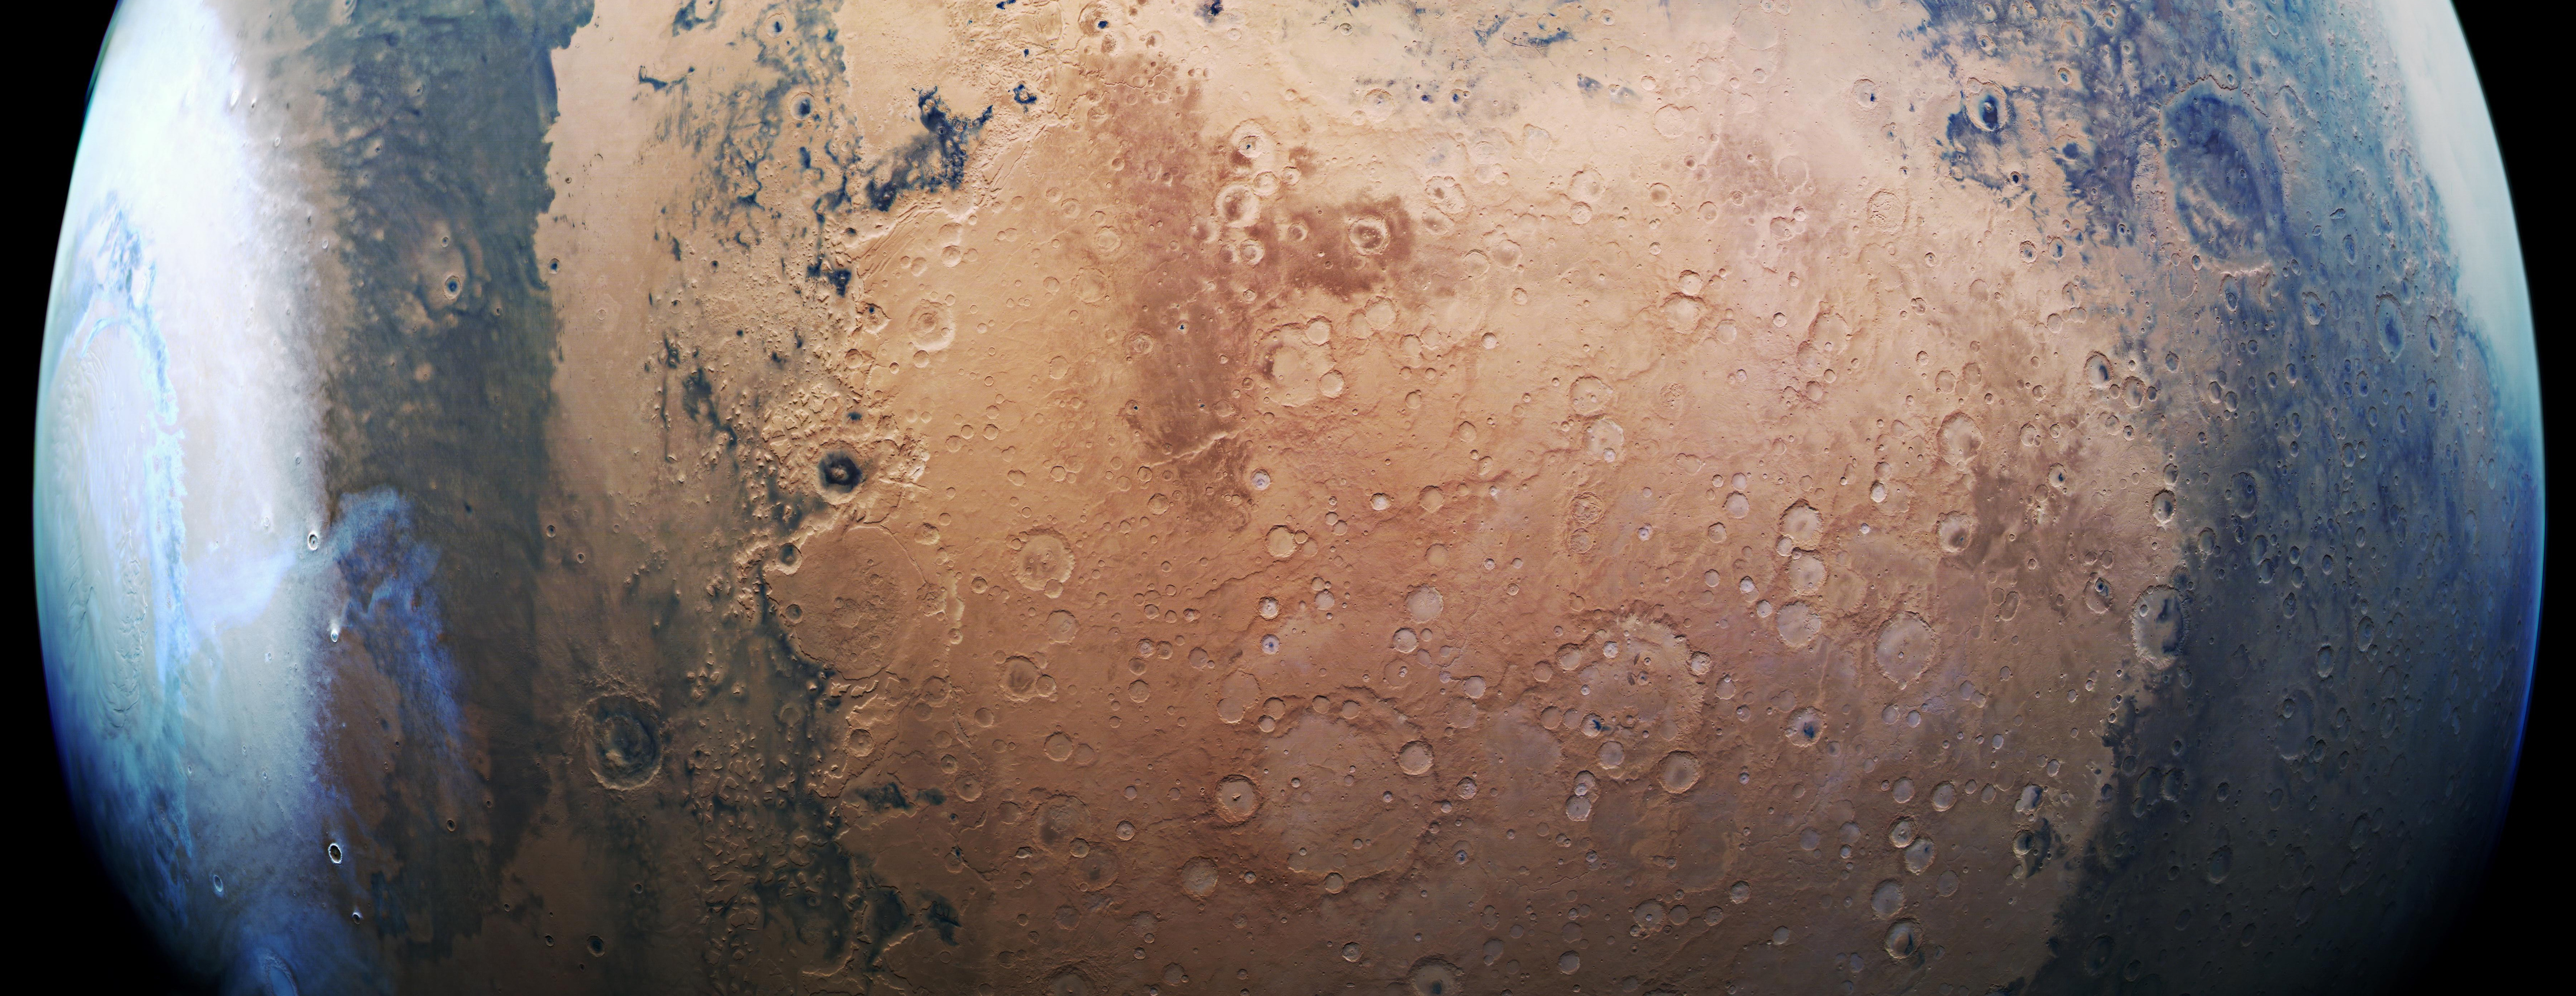 Mars Crater Planet 7166x2772